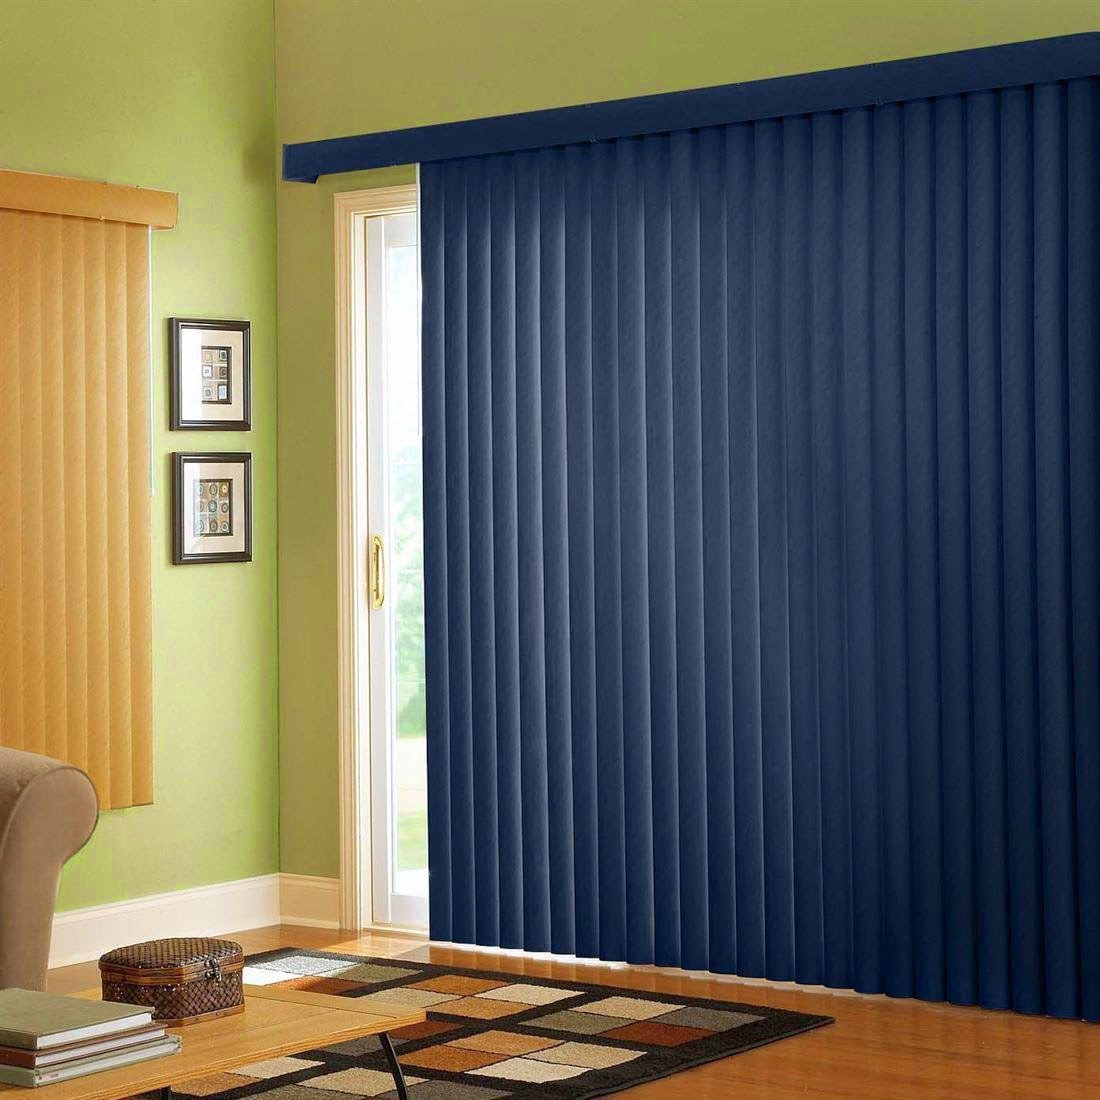 Curtain Ideas: Curtain rods for sliding glass doors with vertical blinds